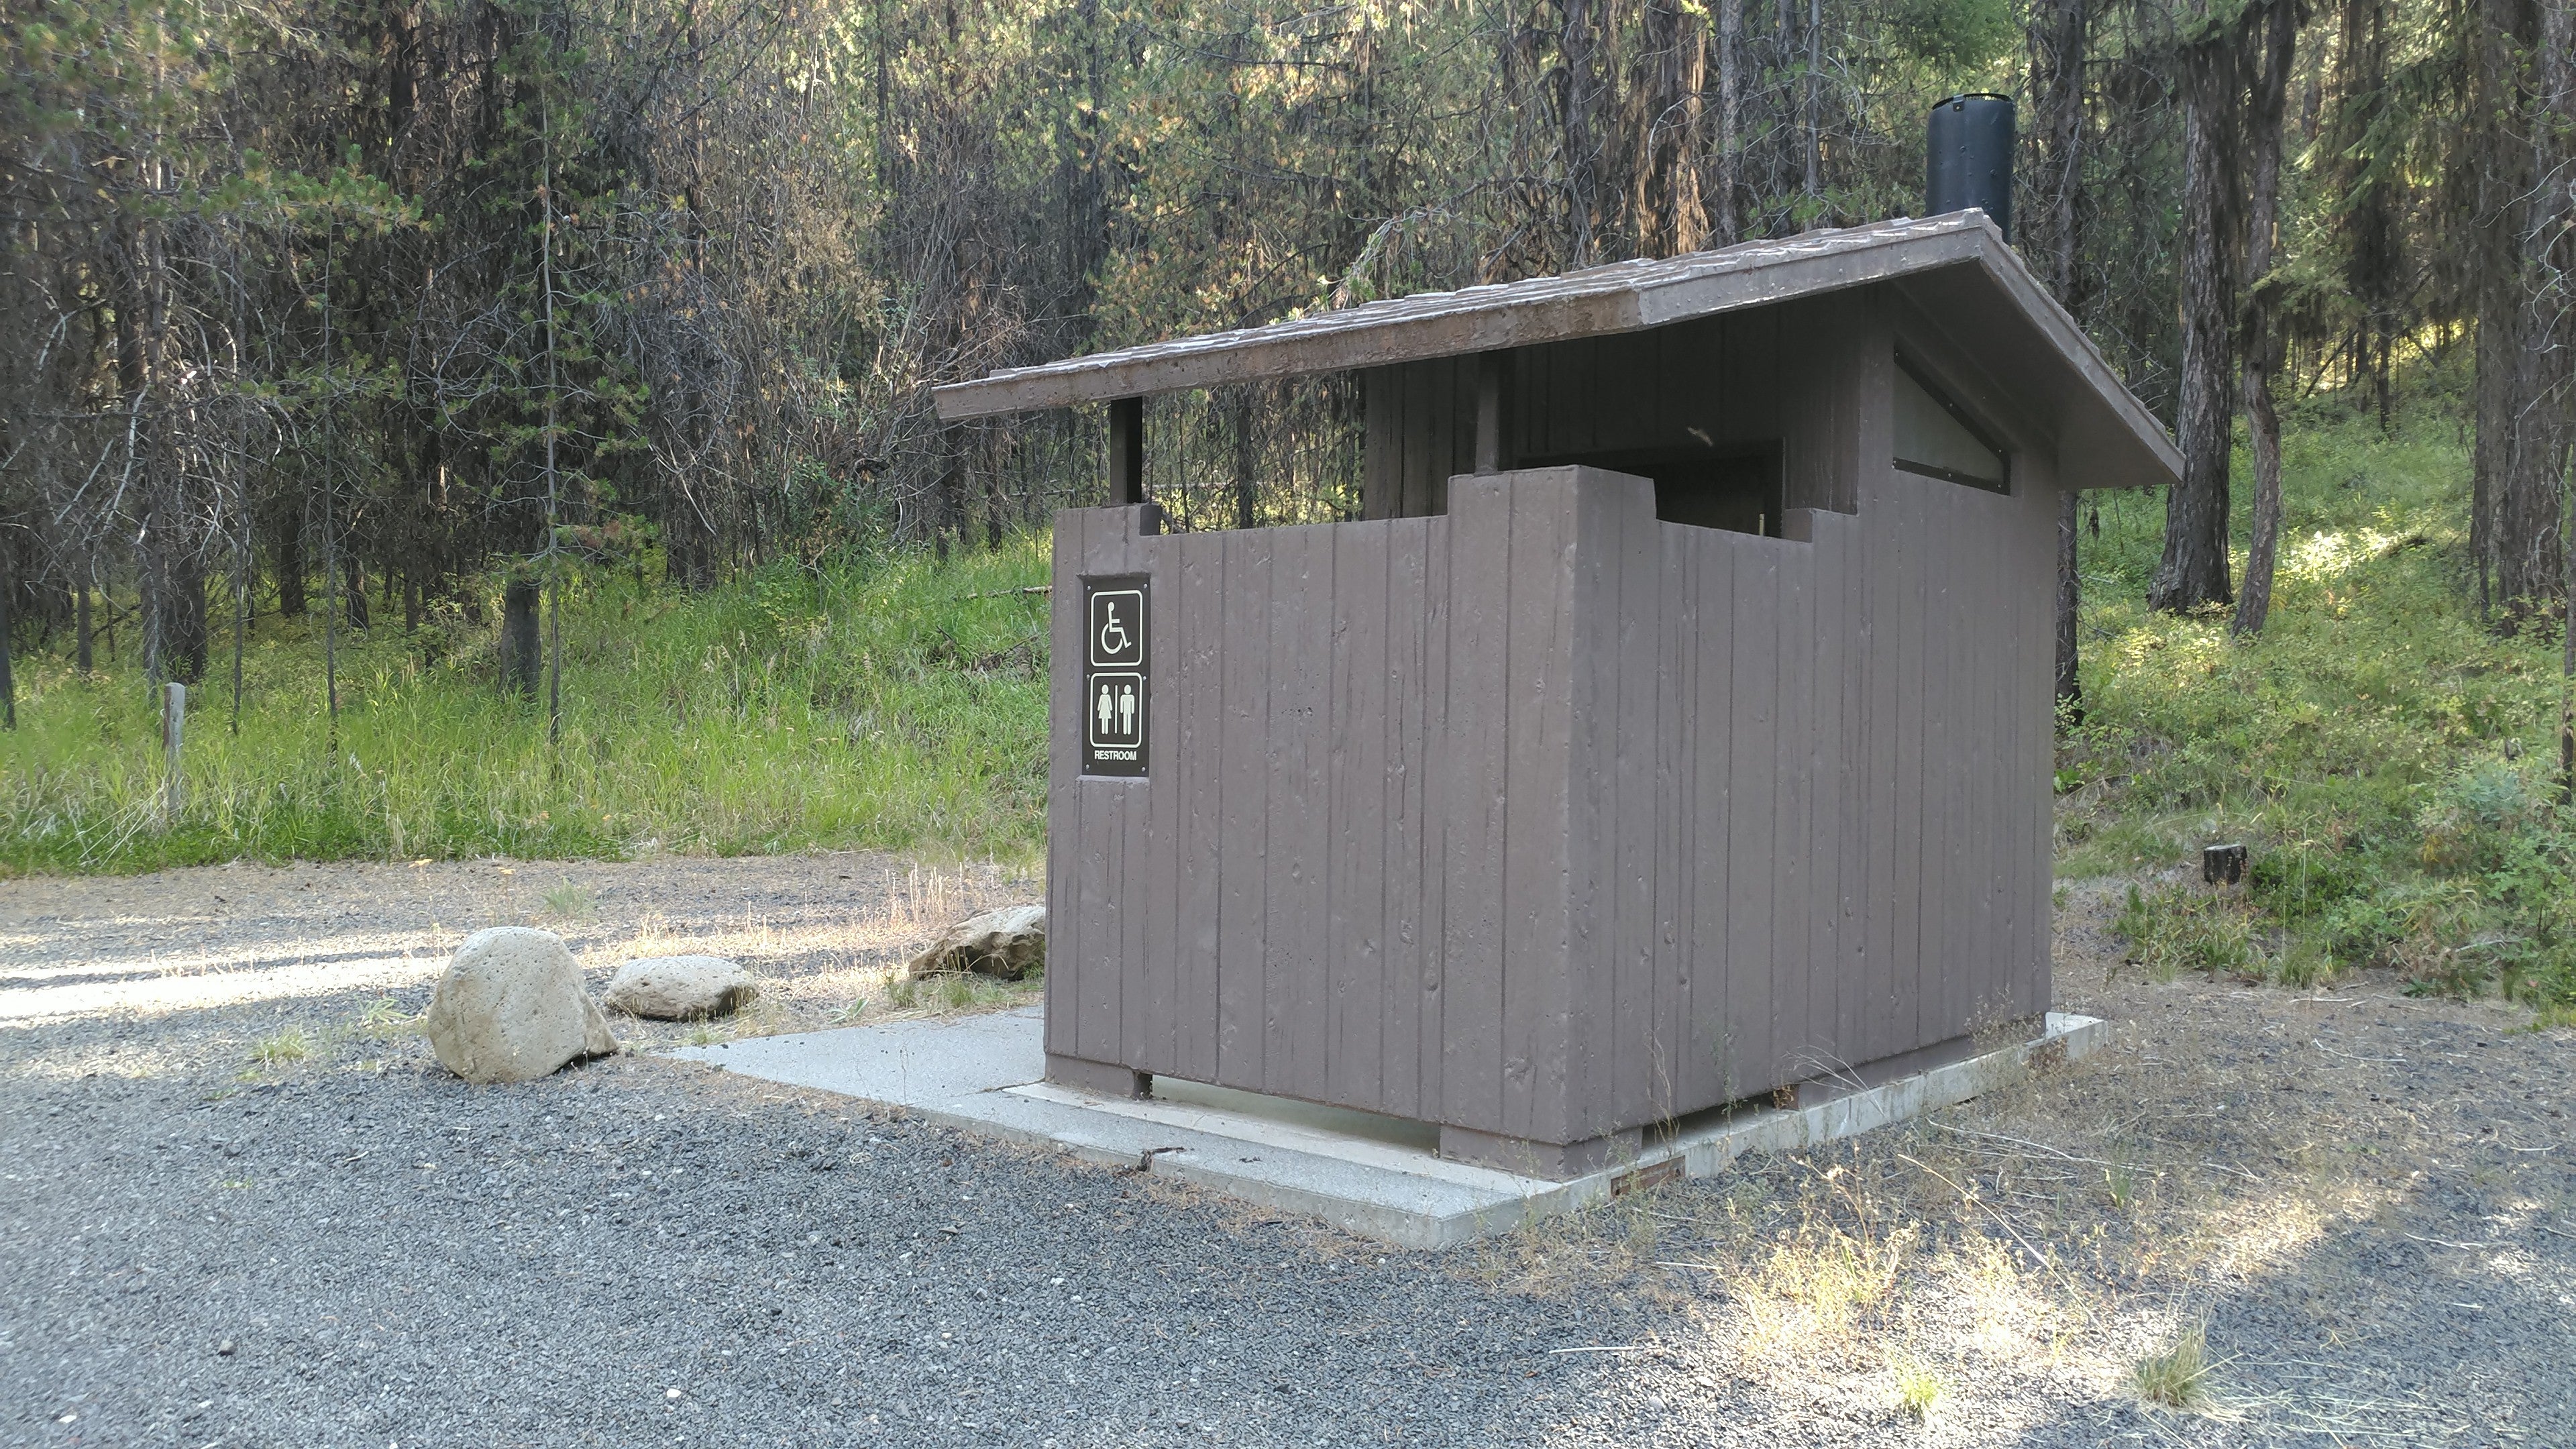 Camper submitted image from Bear Wallow Creek - 3